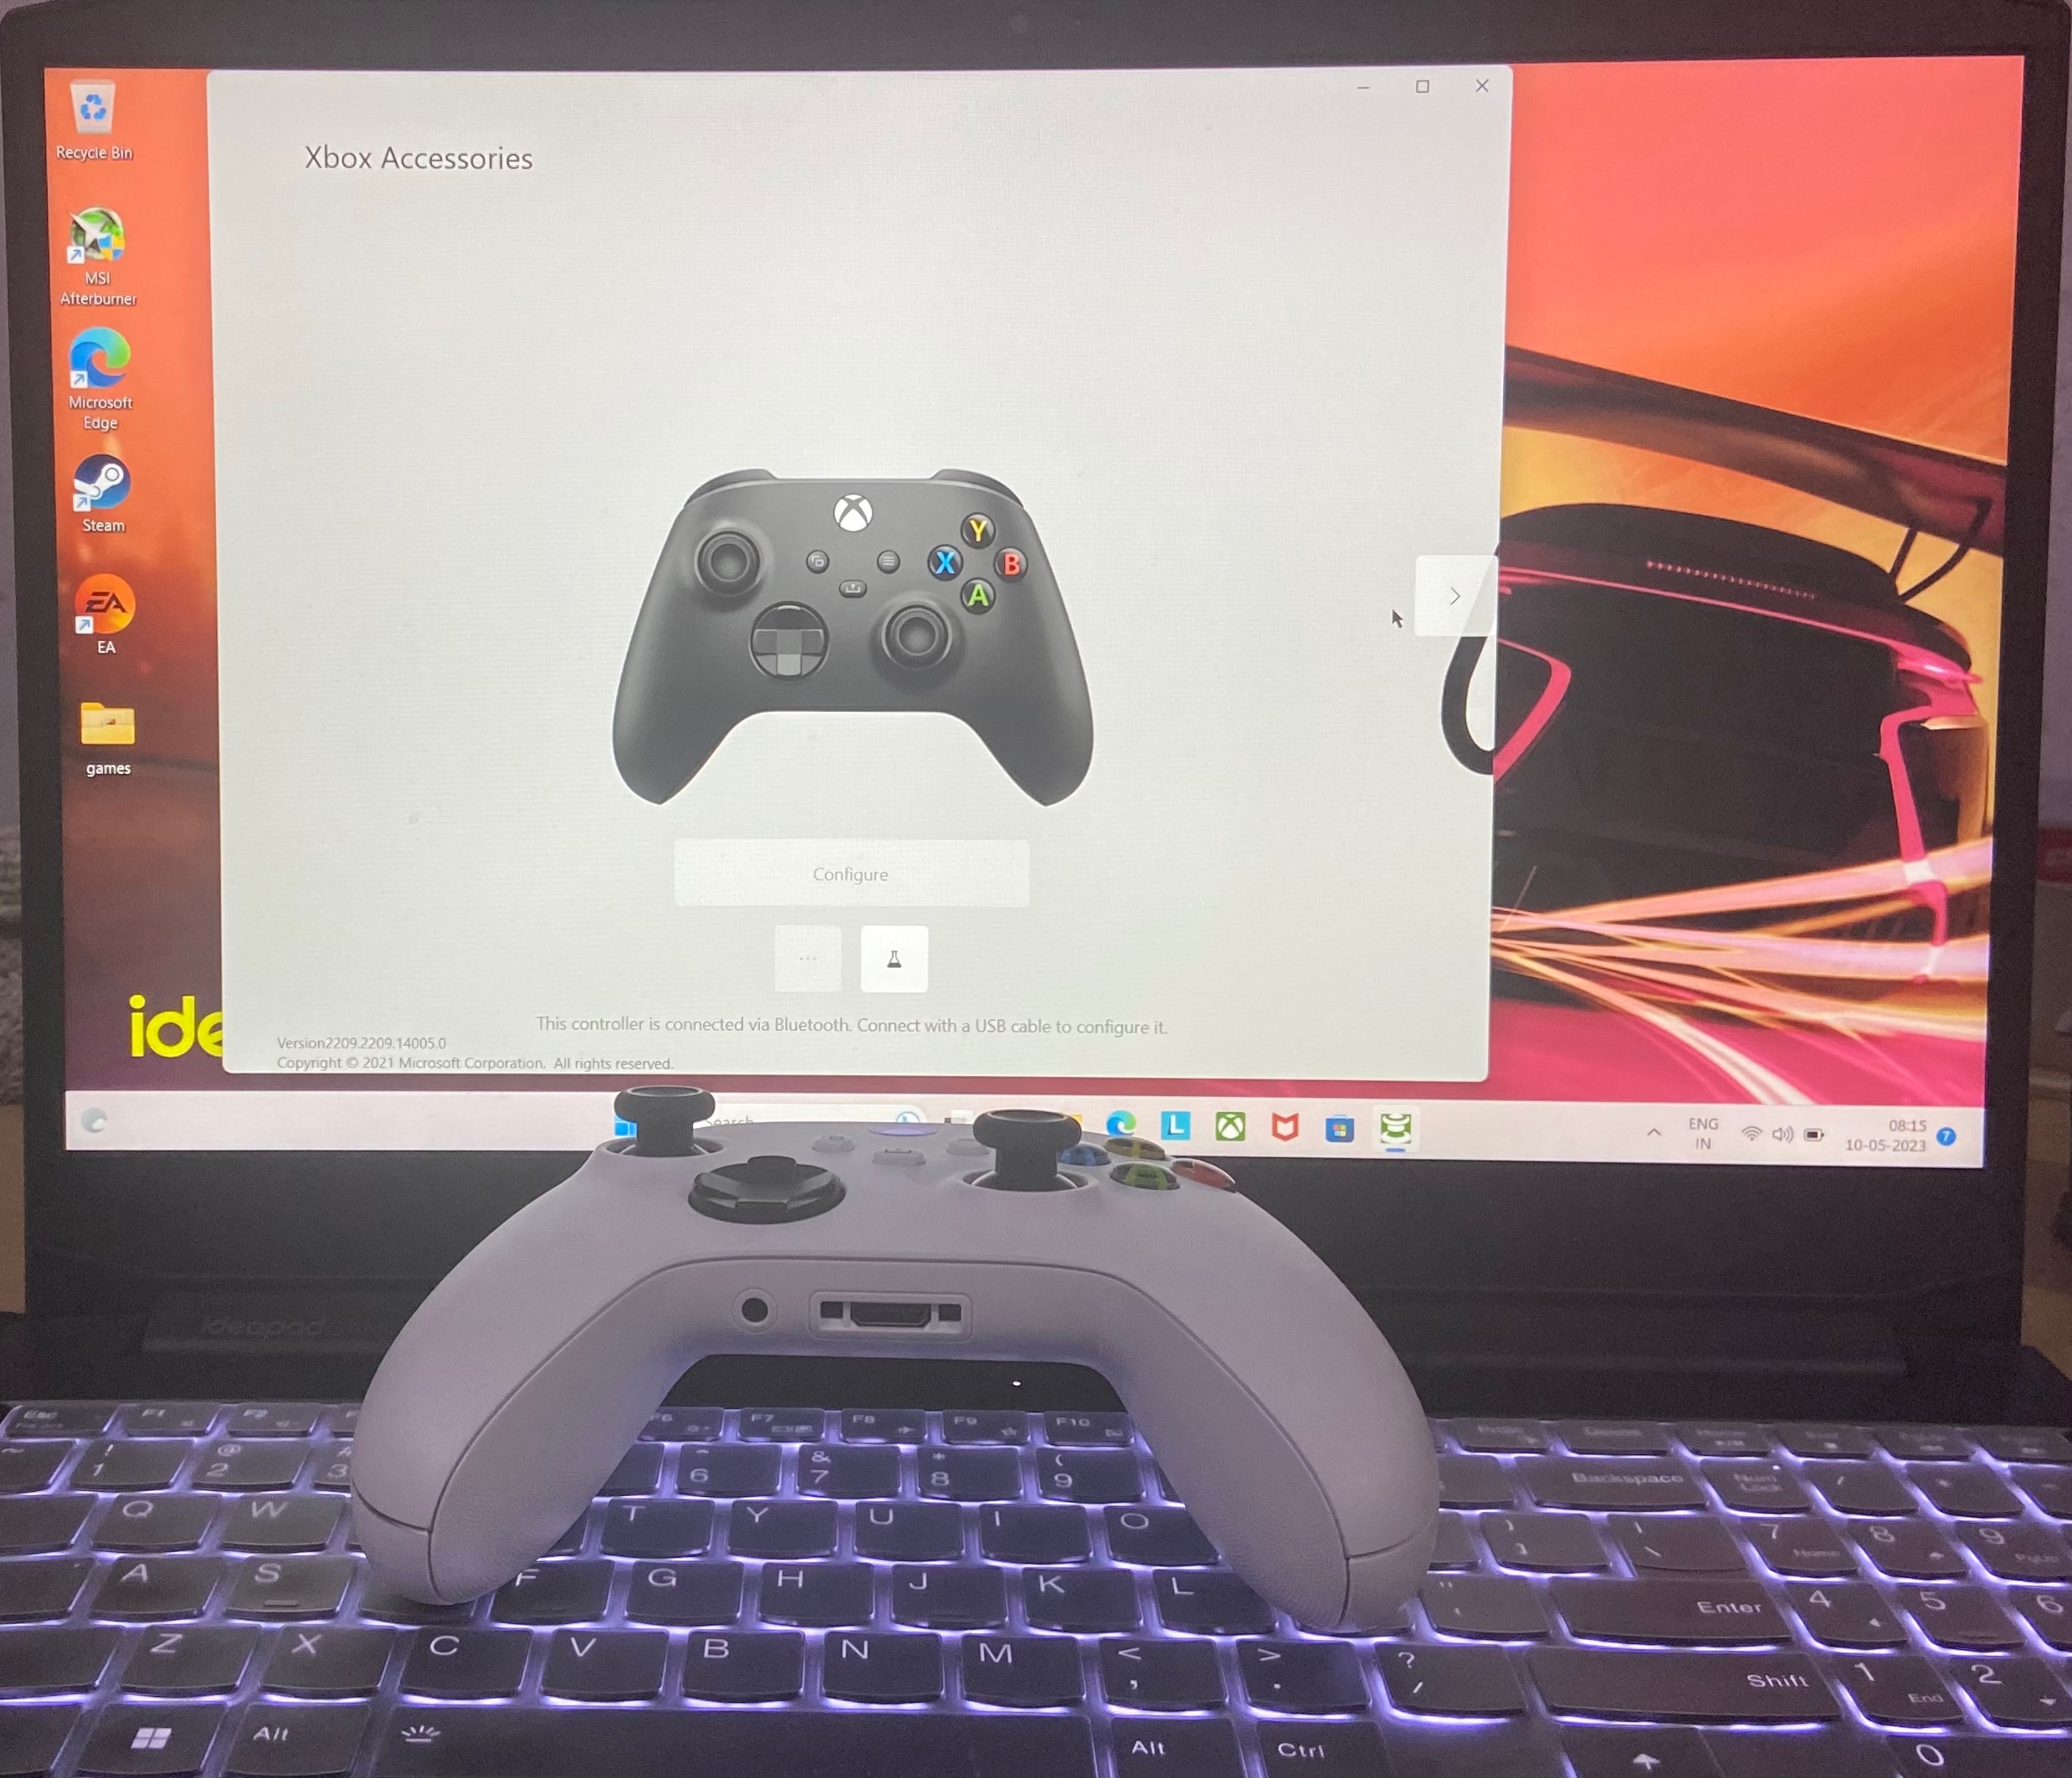 I cant configure my wireless xbox controller on xbox accessories app, How do I turn off... [​IMG]